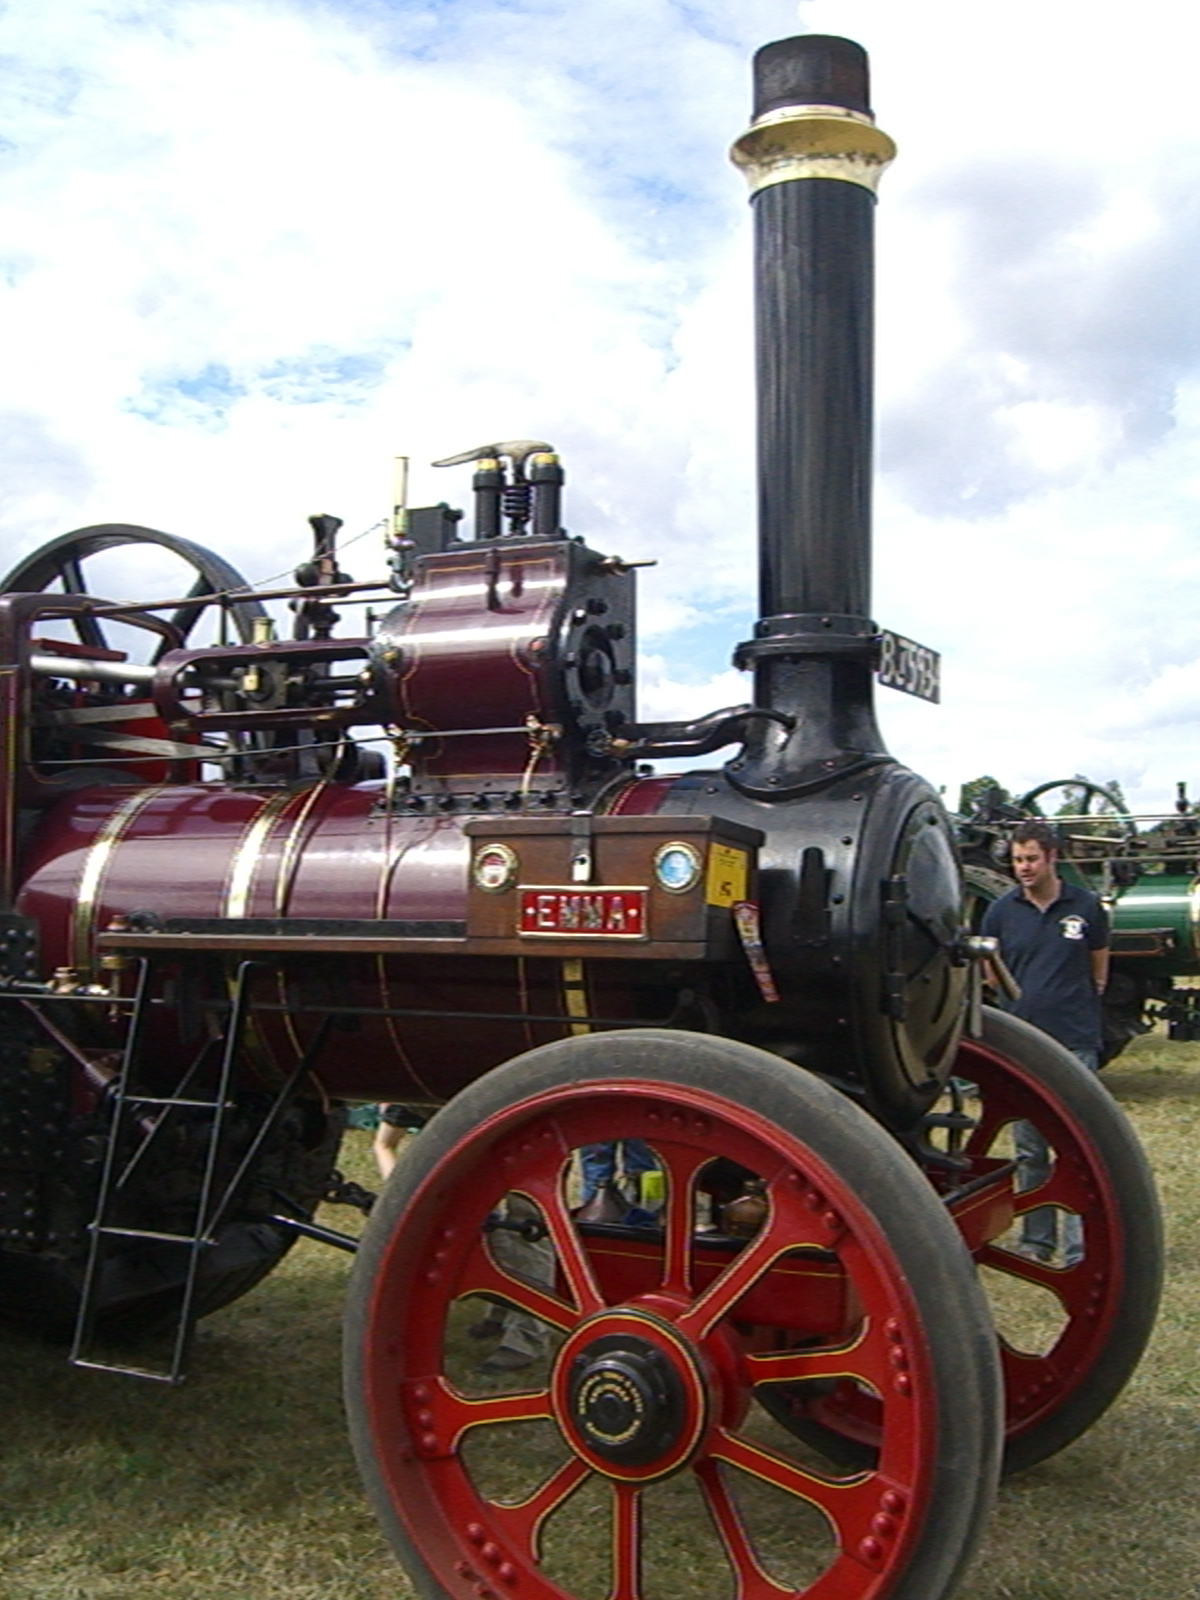 a red steam engine on display at a show